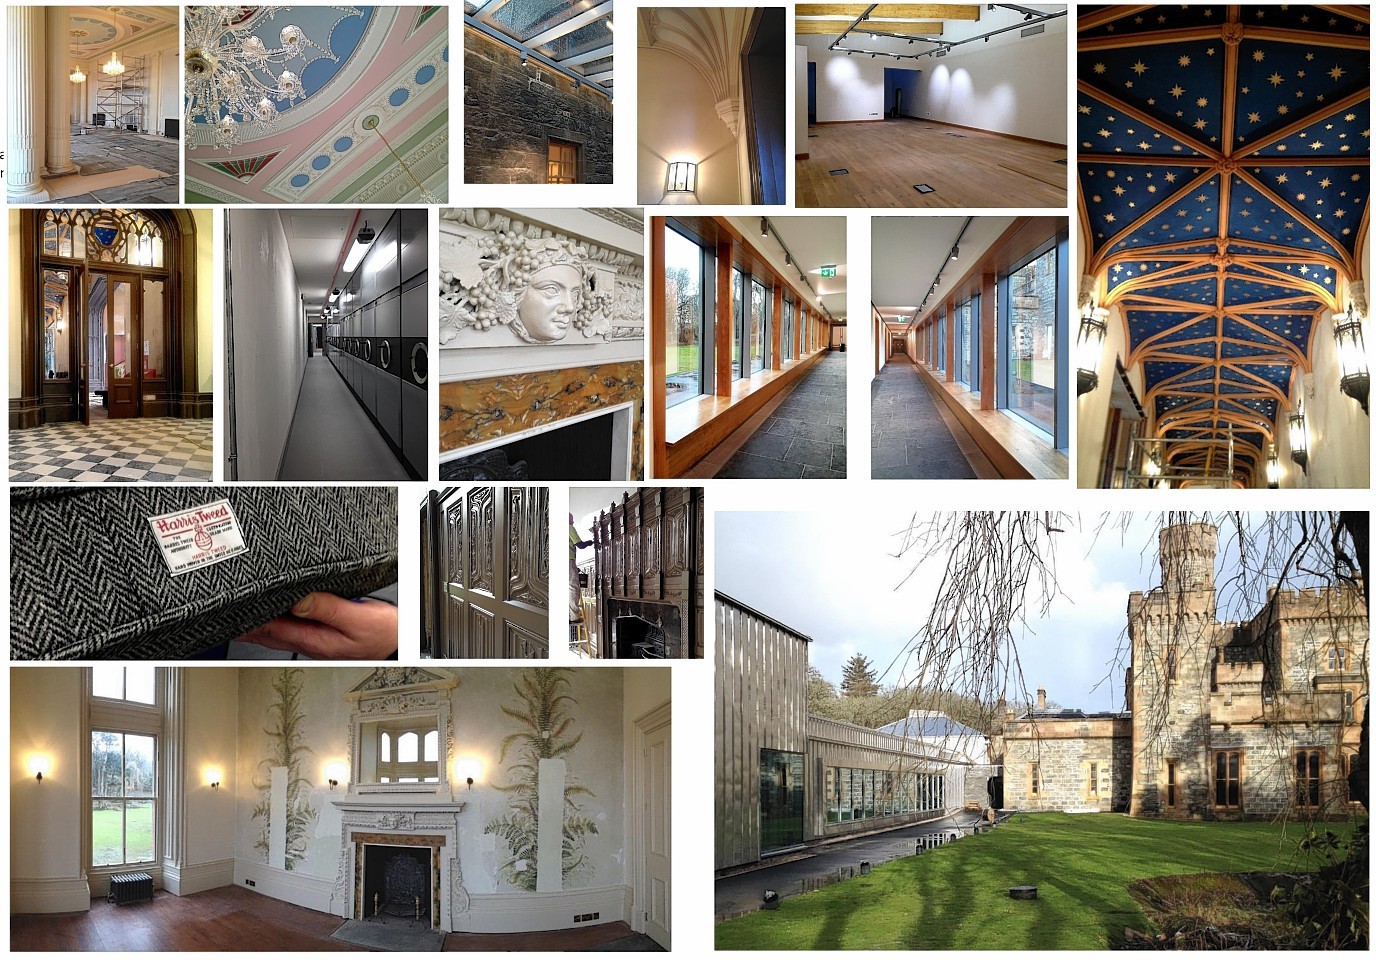 Interior shots of the renovated Lews Castle